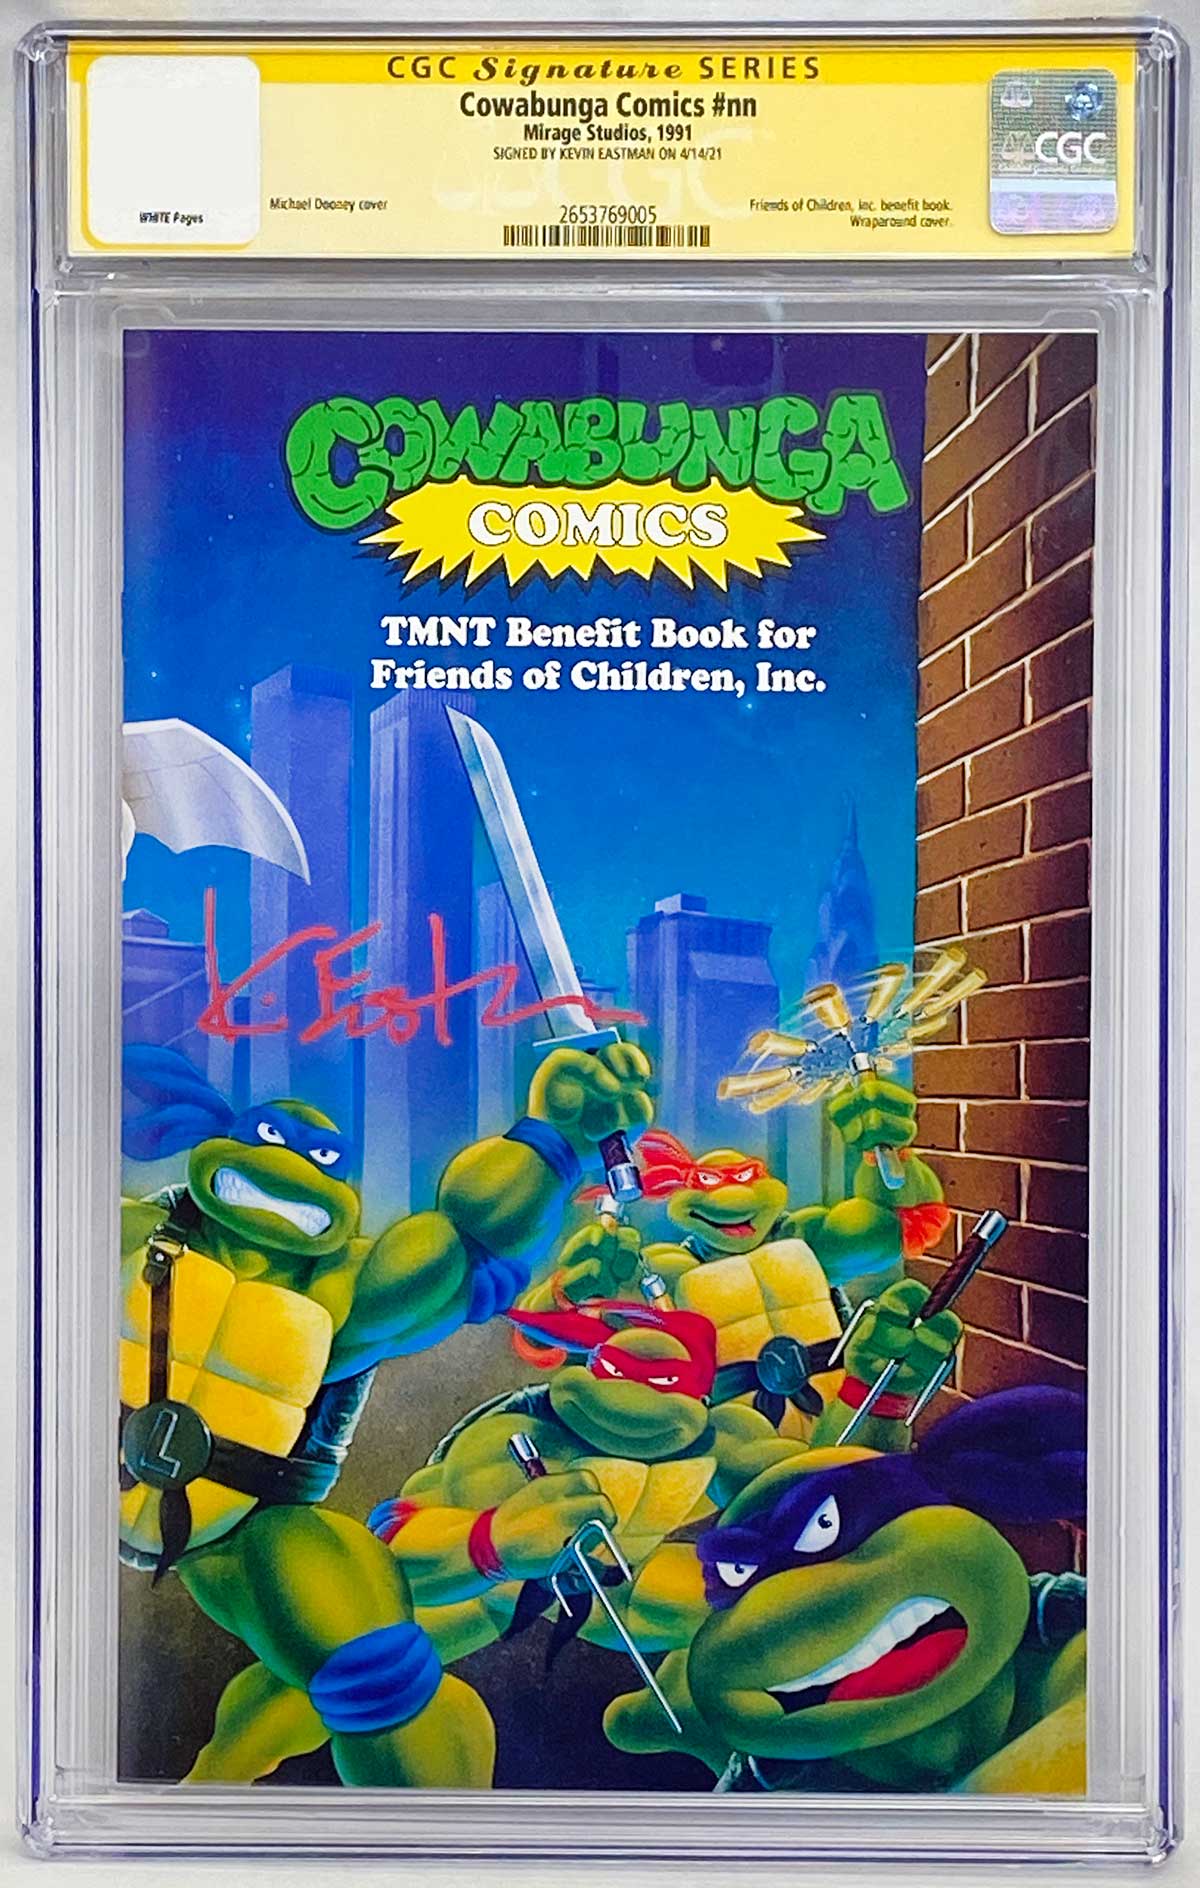 1991 Cowabunga Comics Signed by Kevin Eastman – Mirage Publishing, CGC Signature Series Graded